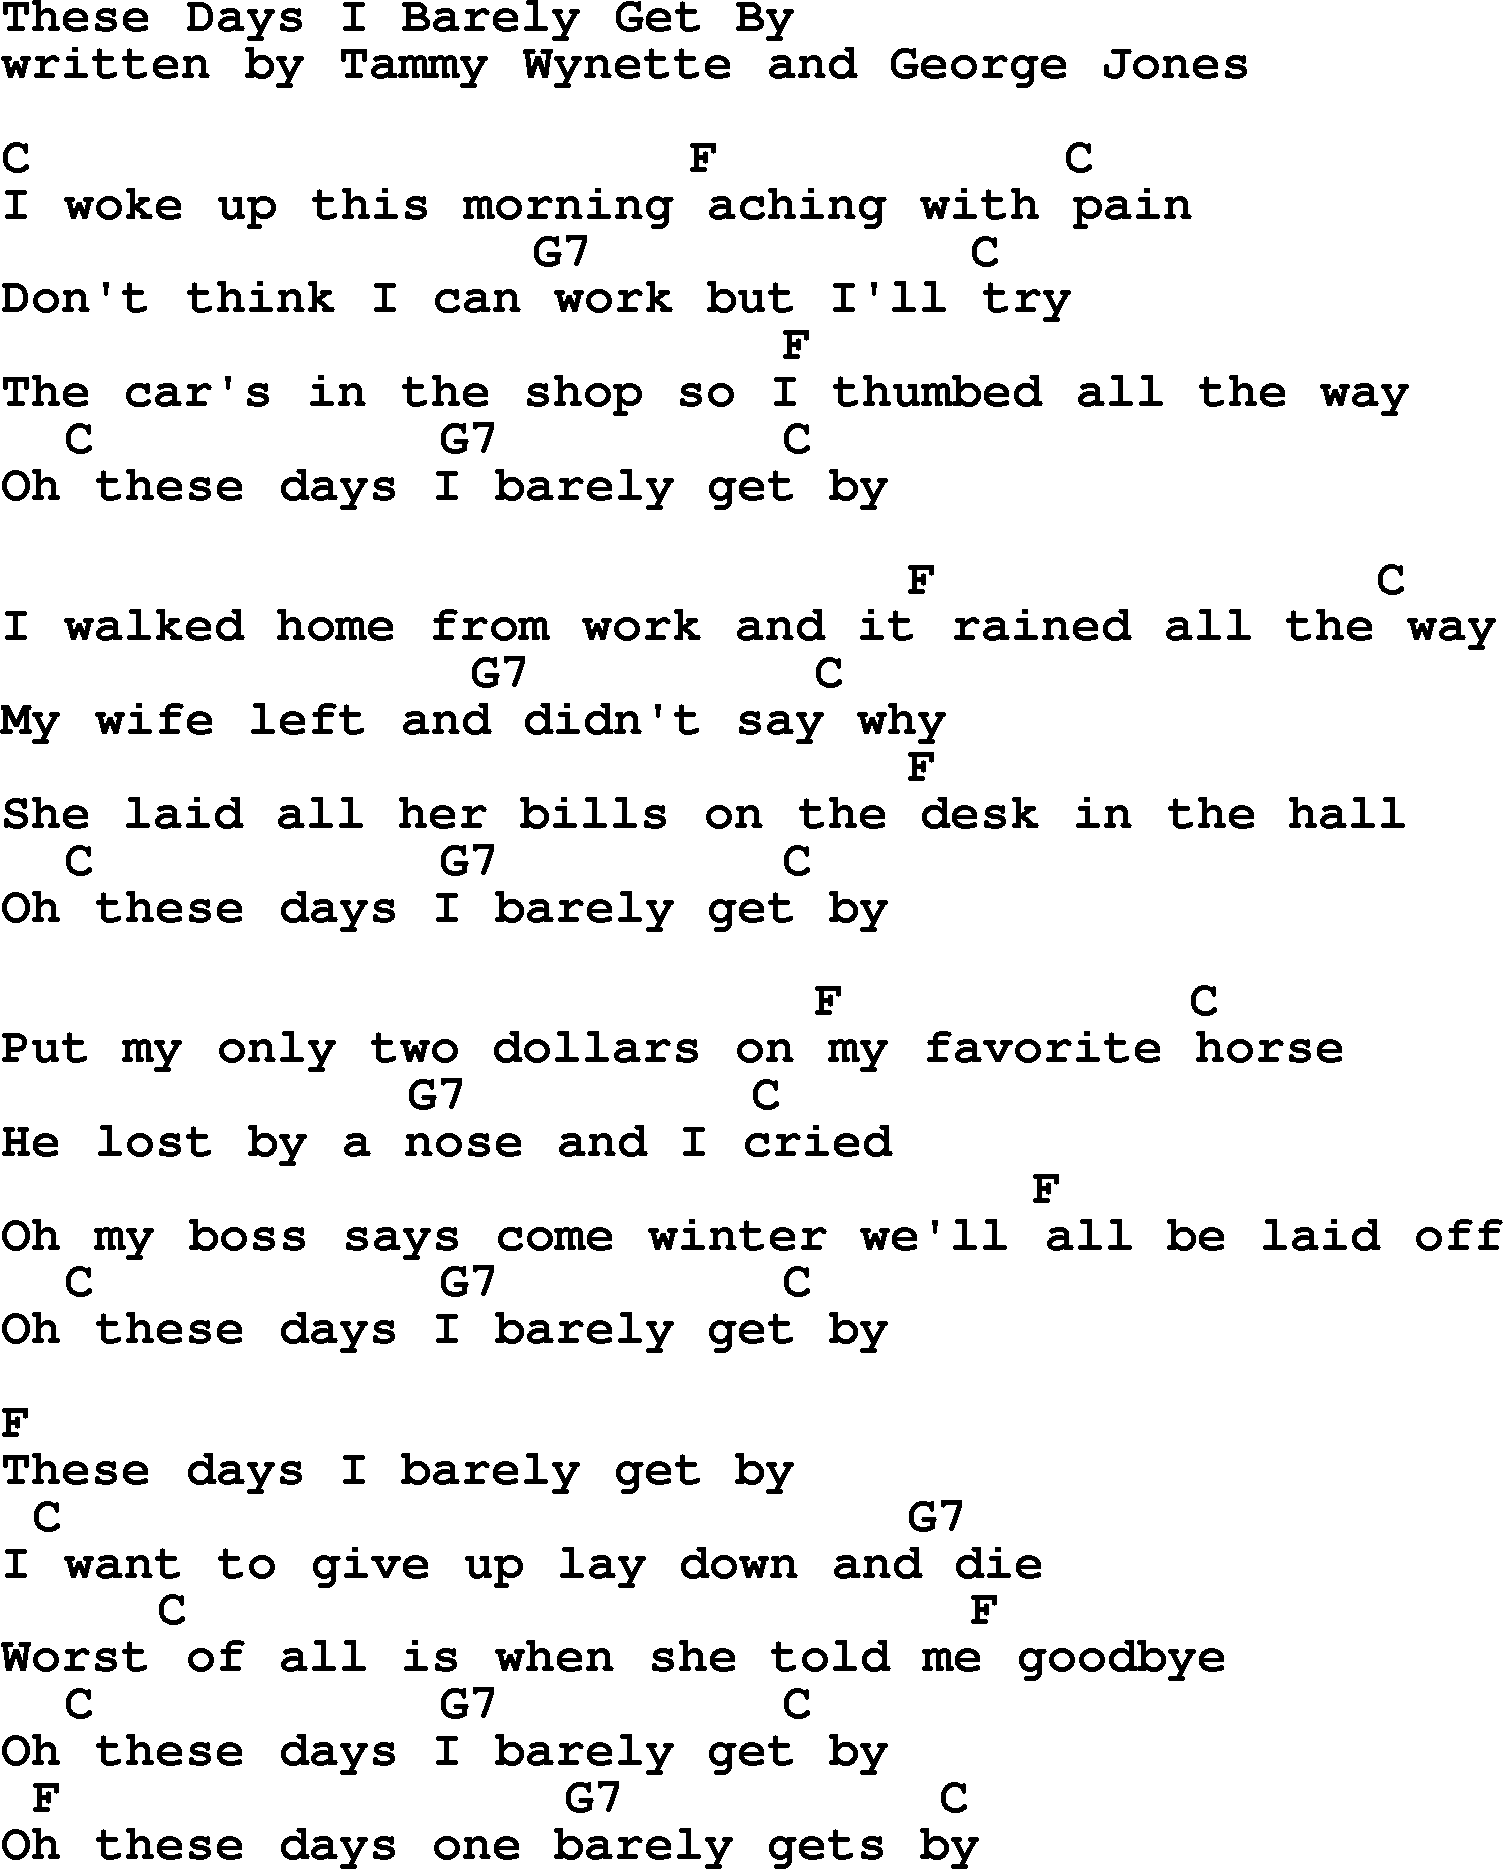 George Jones song: These Days I Barely Get By, lyrics and chords